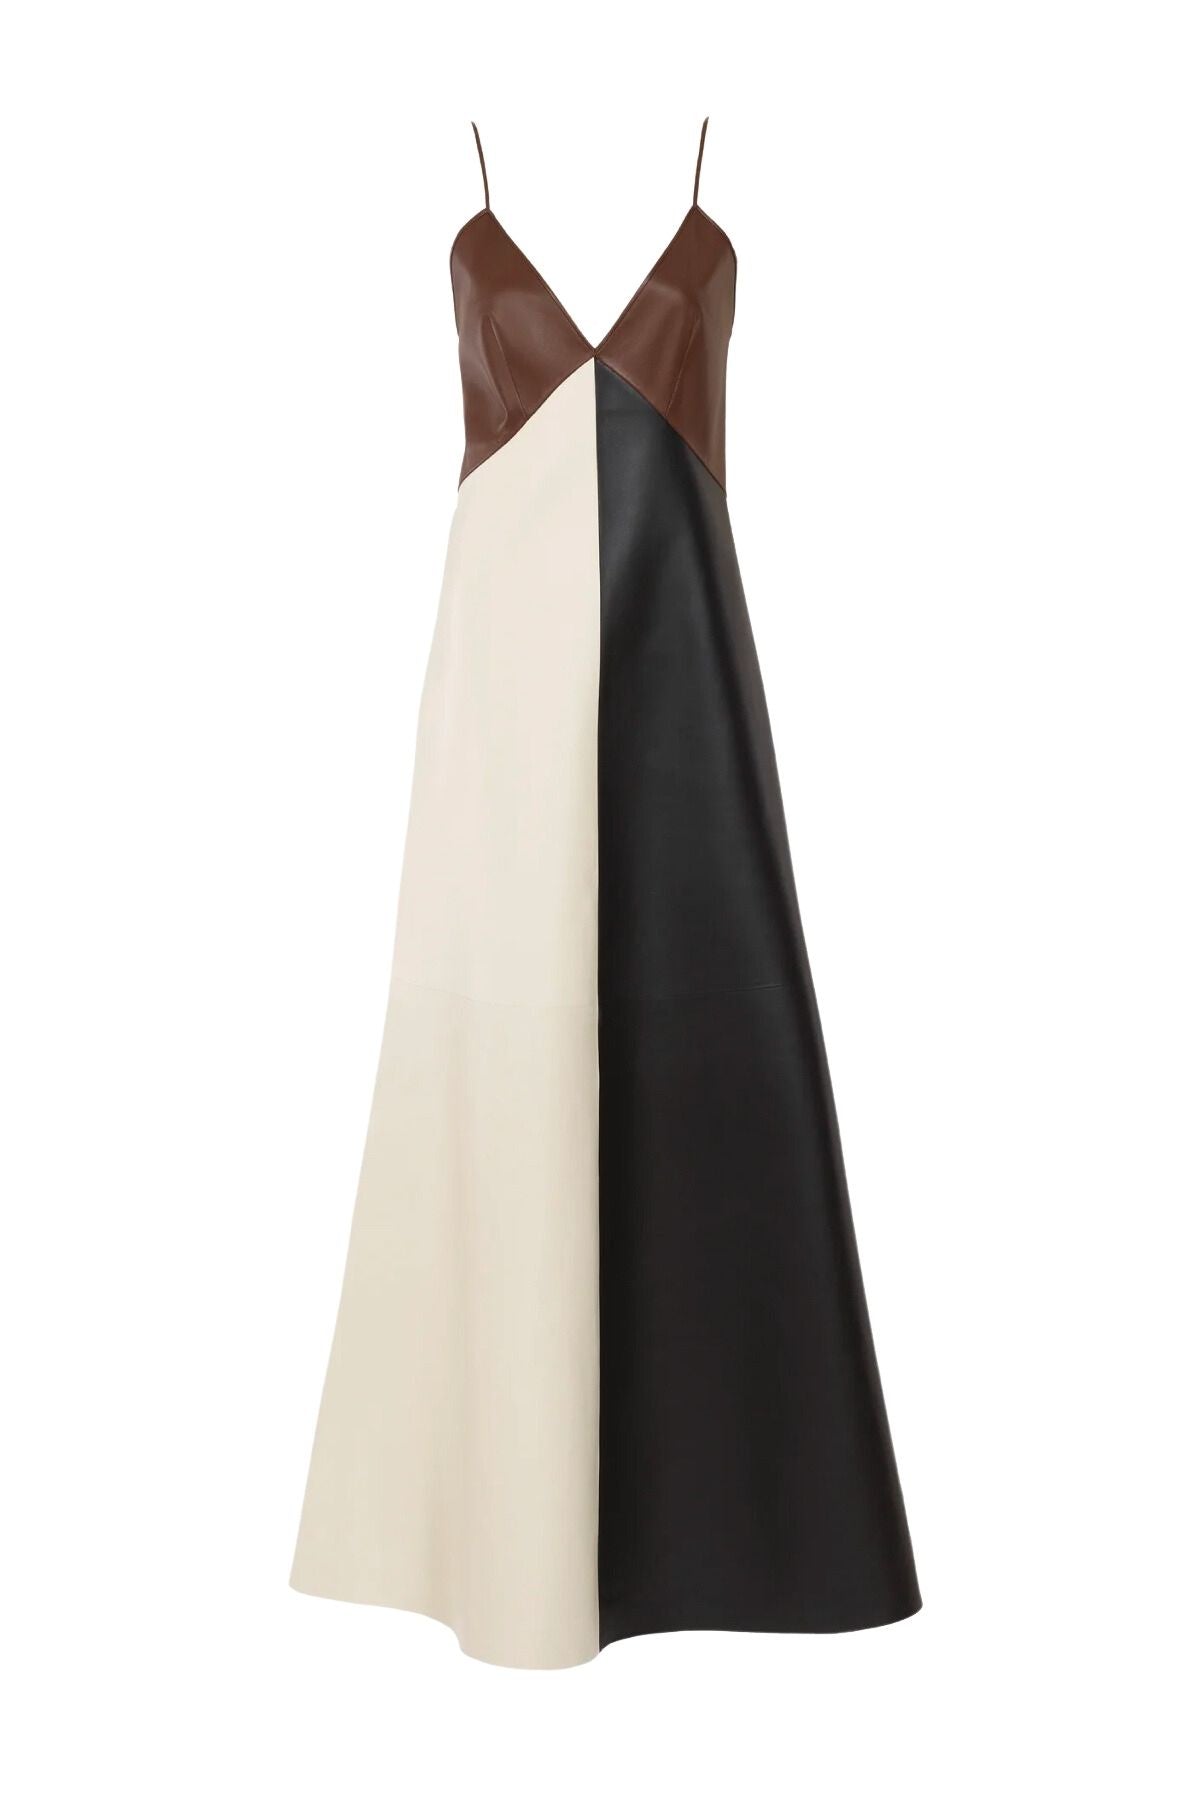 Chloé  Patchwork Leather Dress - Multi Brown